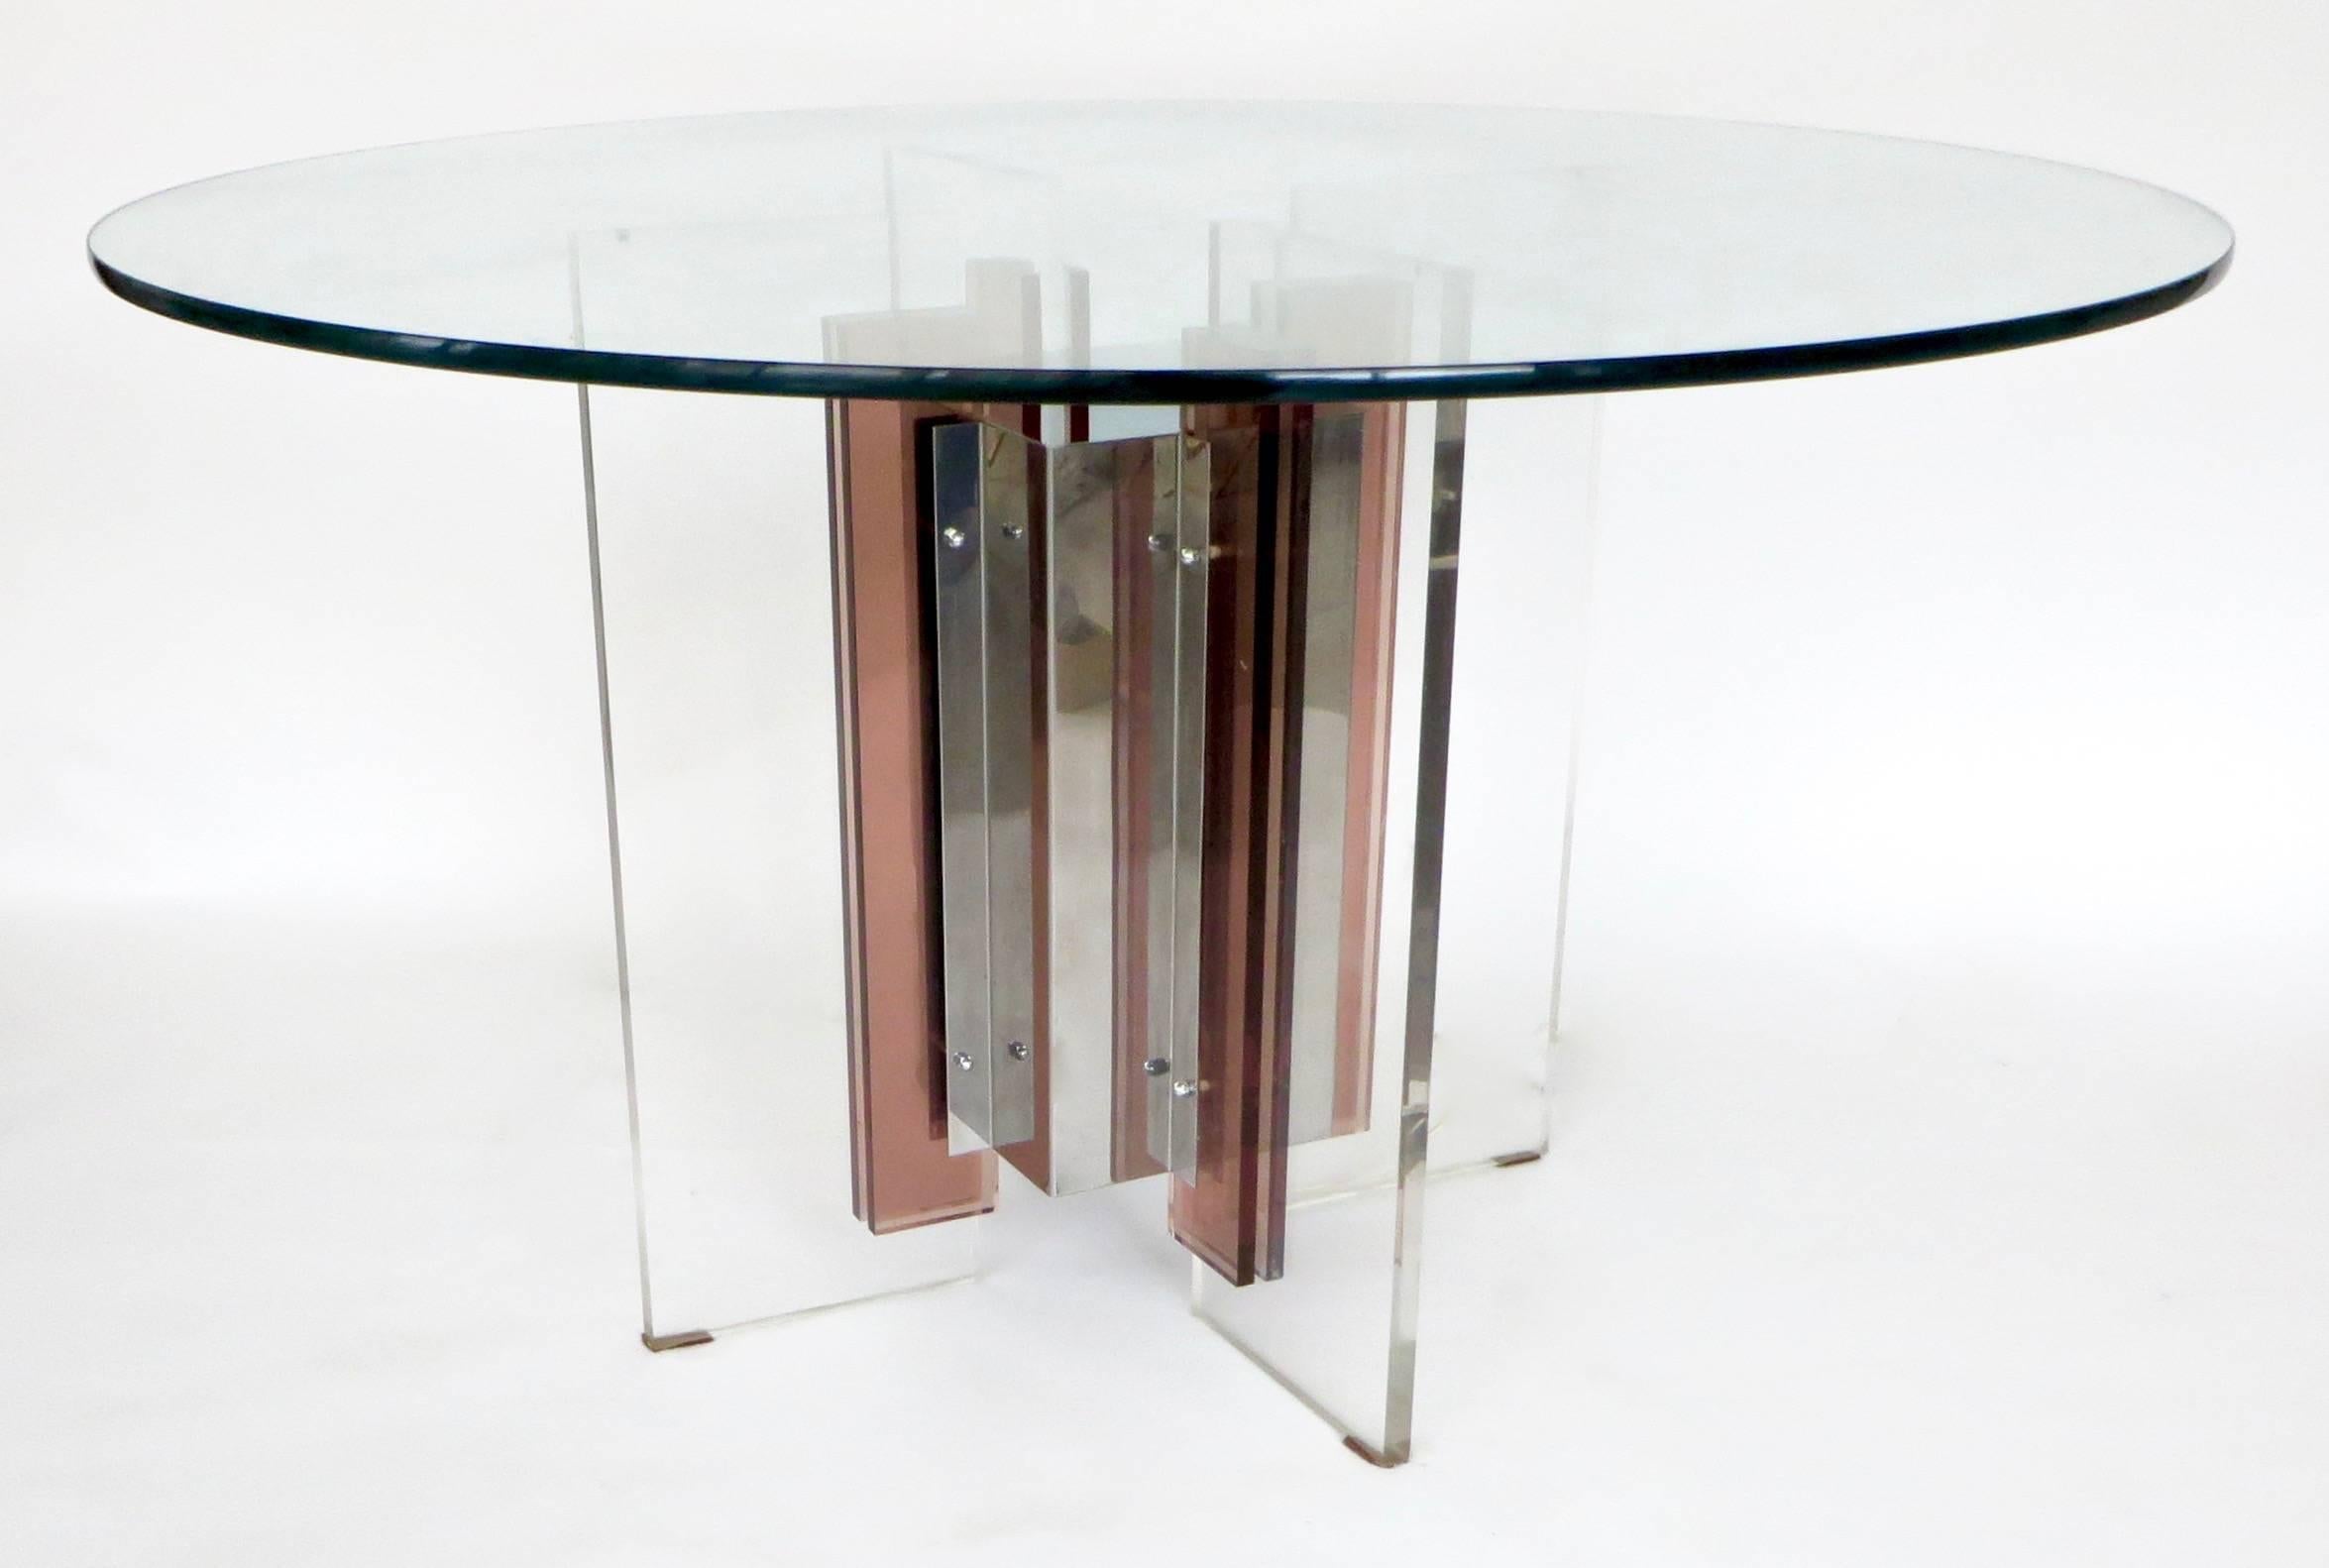 French dining or center table by the French Designer Philippe-Jean, signed P Jean on the stainless steel.
Shown by Galerie Eric and Xiane Germain, Paris, circa 1970.
The galerie edited and showed various important French artists from the 1970s such